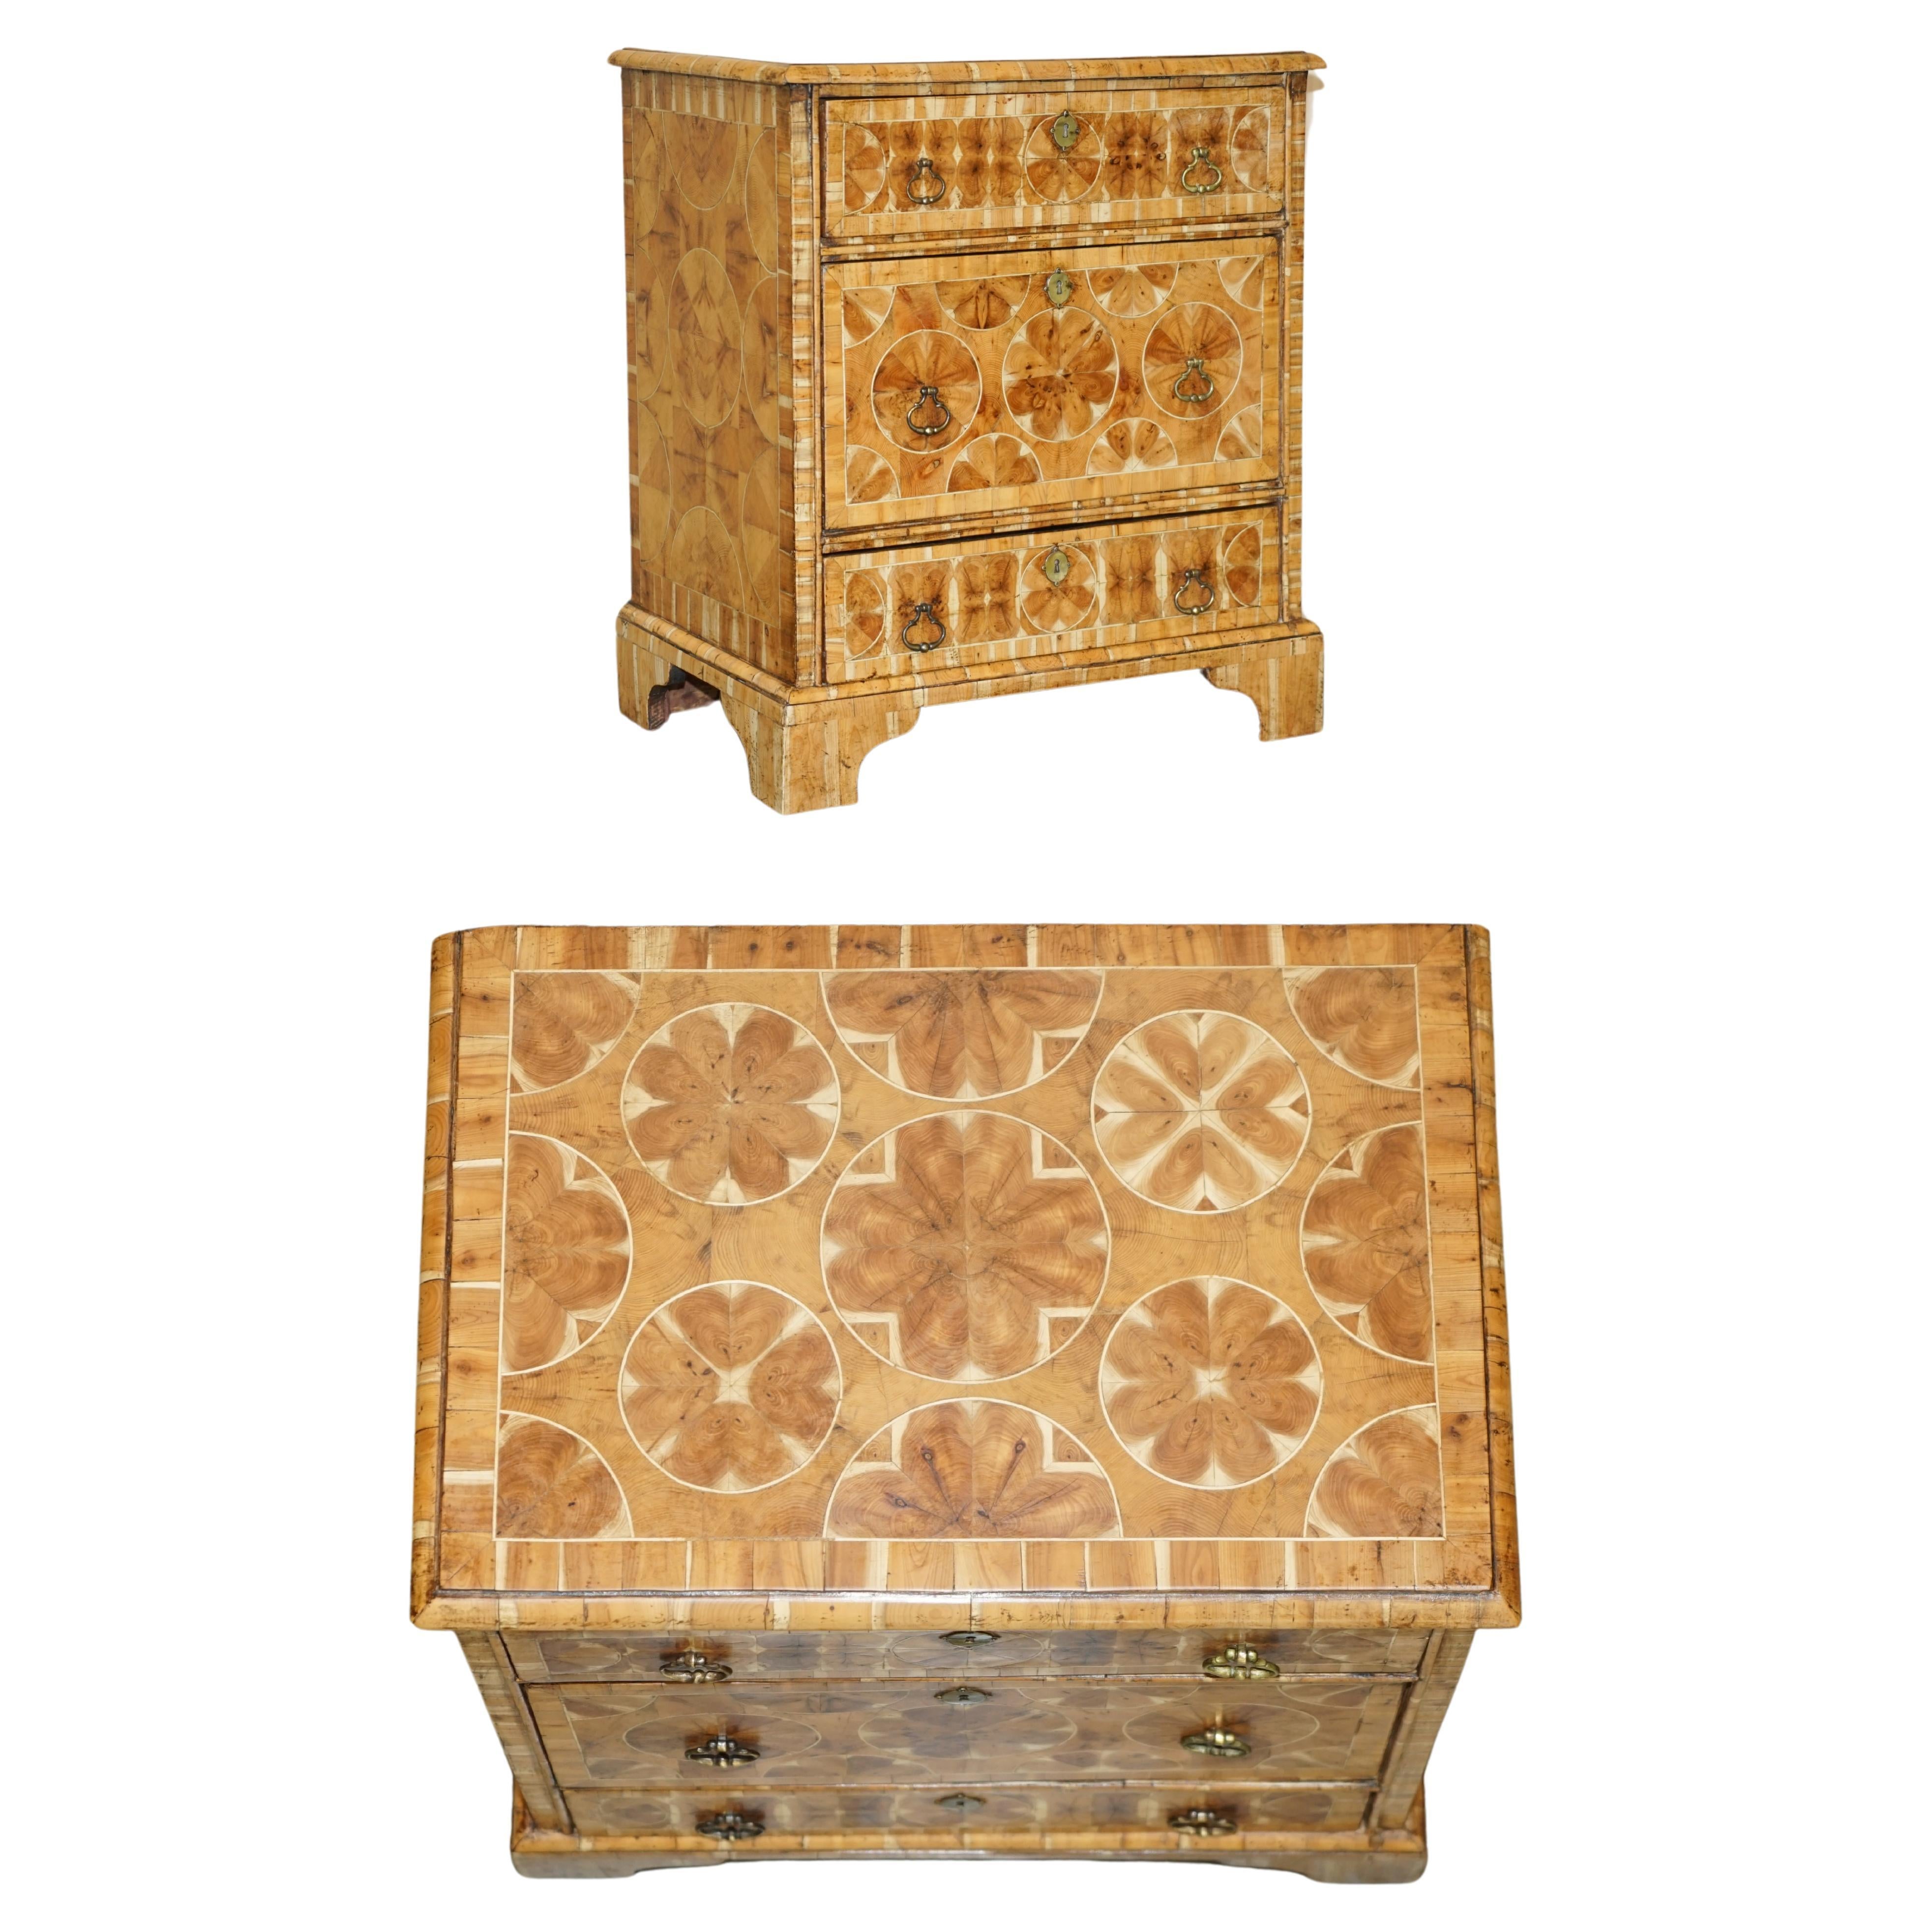 Fine Antique William & Mary Cir 1700 Pine Oyster Laburnum Wood Chest of Drawers For Sale